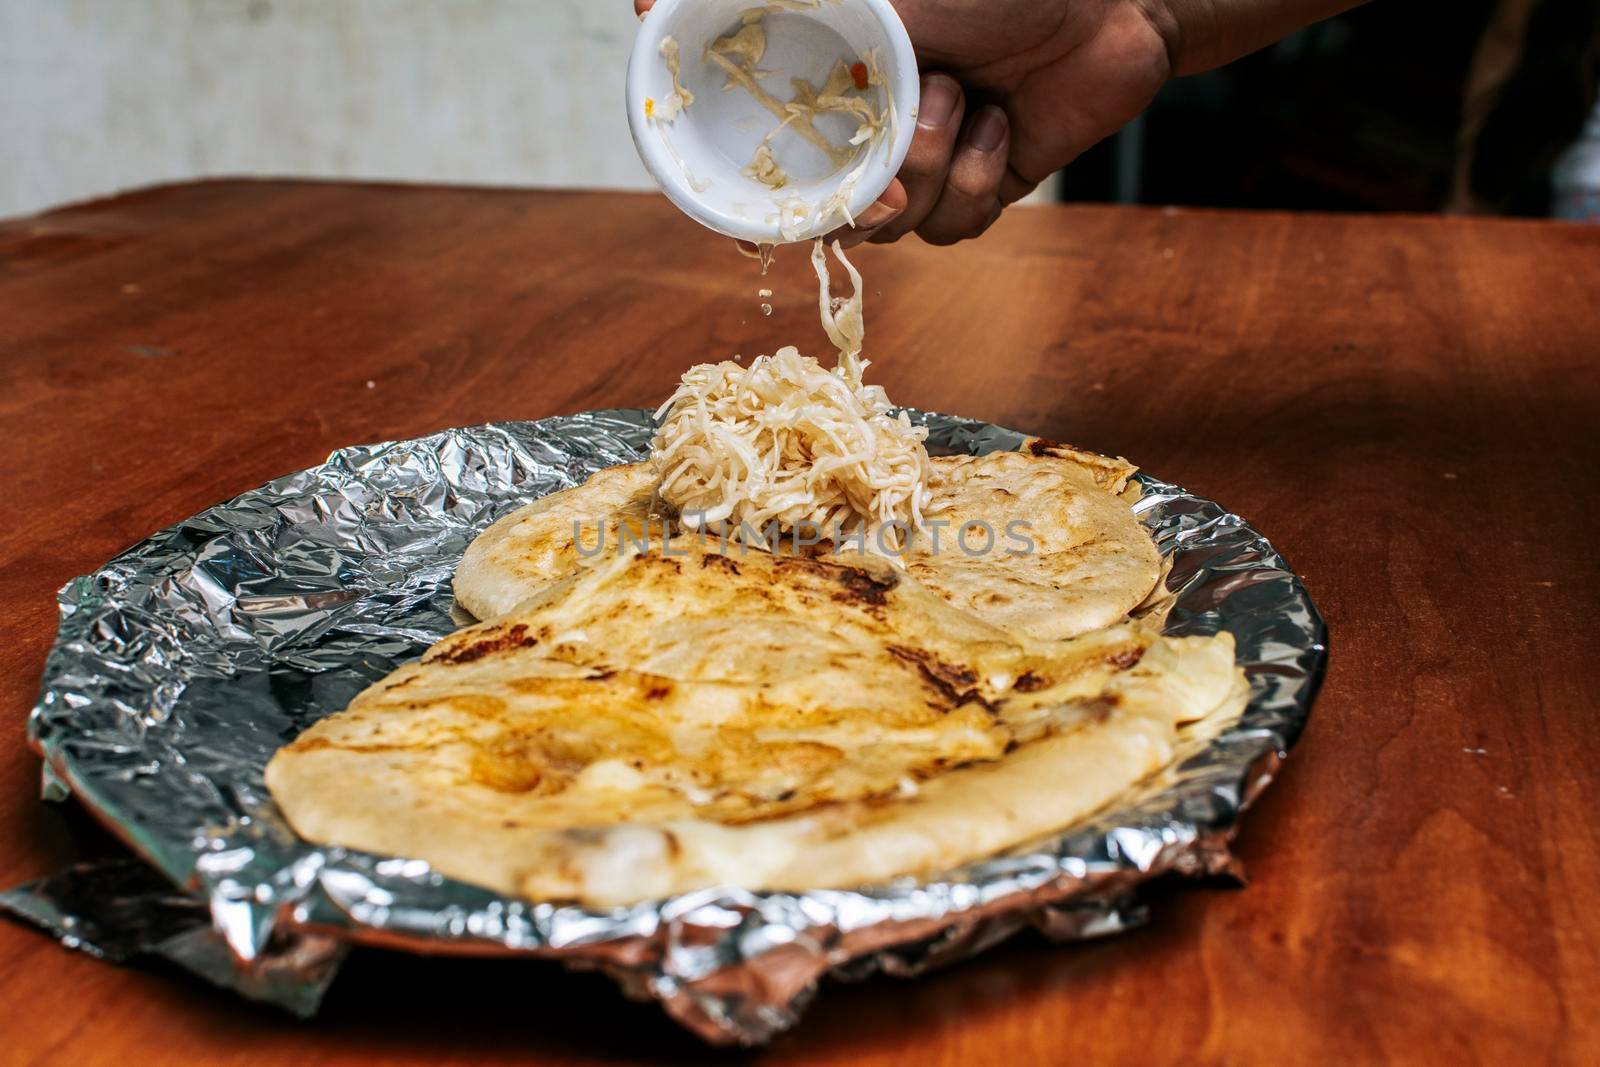 Traditional pupusas served with salad on the table. Nicaraguan pupusas with salad on aluminum foil, View of delicious Salvadoran pupusas served on wooden table.